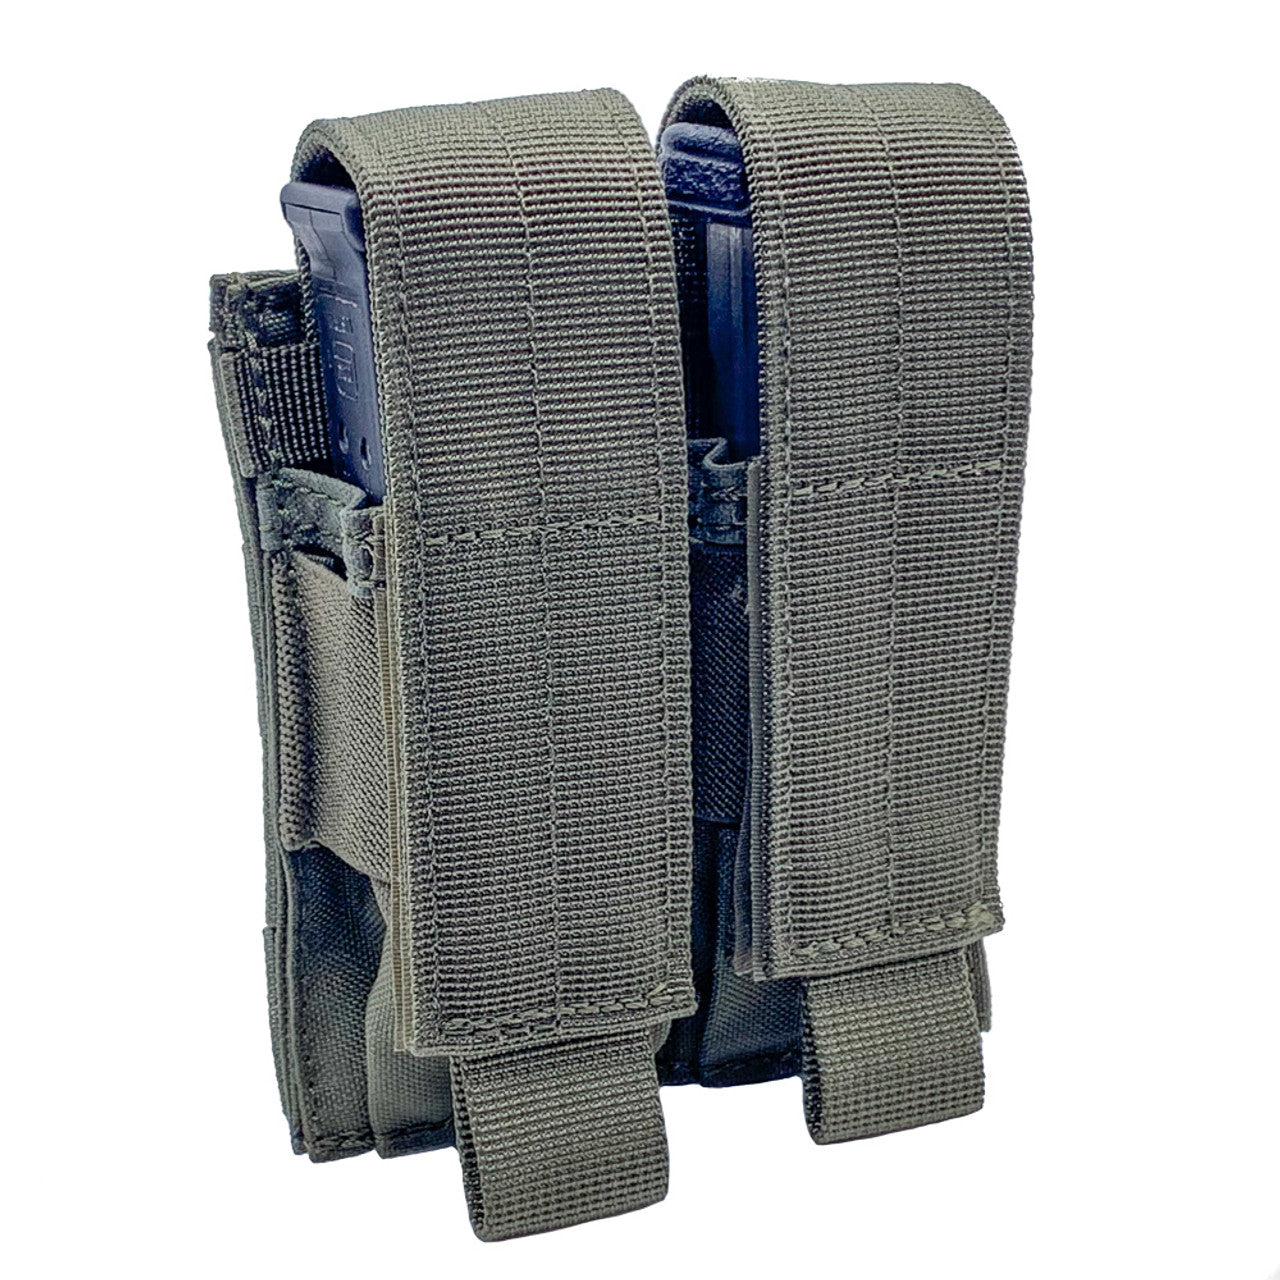 Two Shellback Tactical Double Pistol Mag Pouches on a white background.